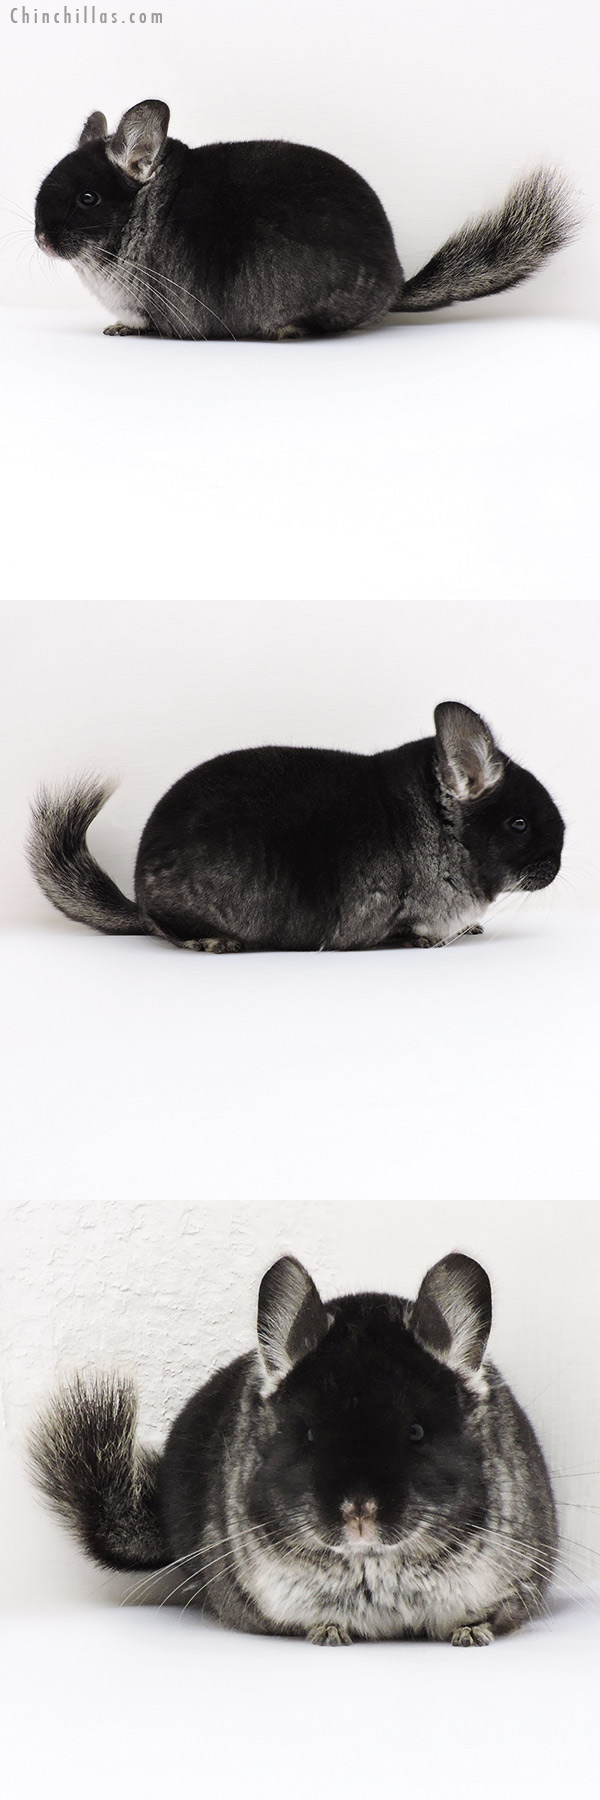 Chinchilla or related item offered for sale or export on Chinchillas.com - 18138 Large Brevi Type Premium Production Quality Black Velvet Female Chinchilla